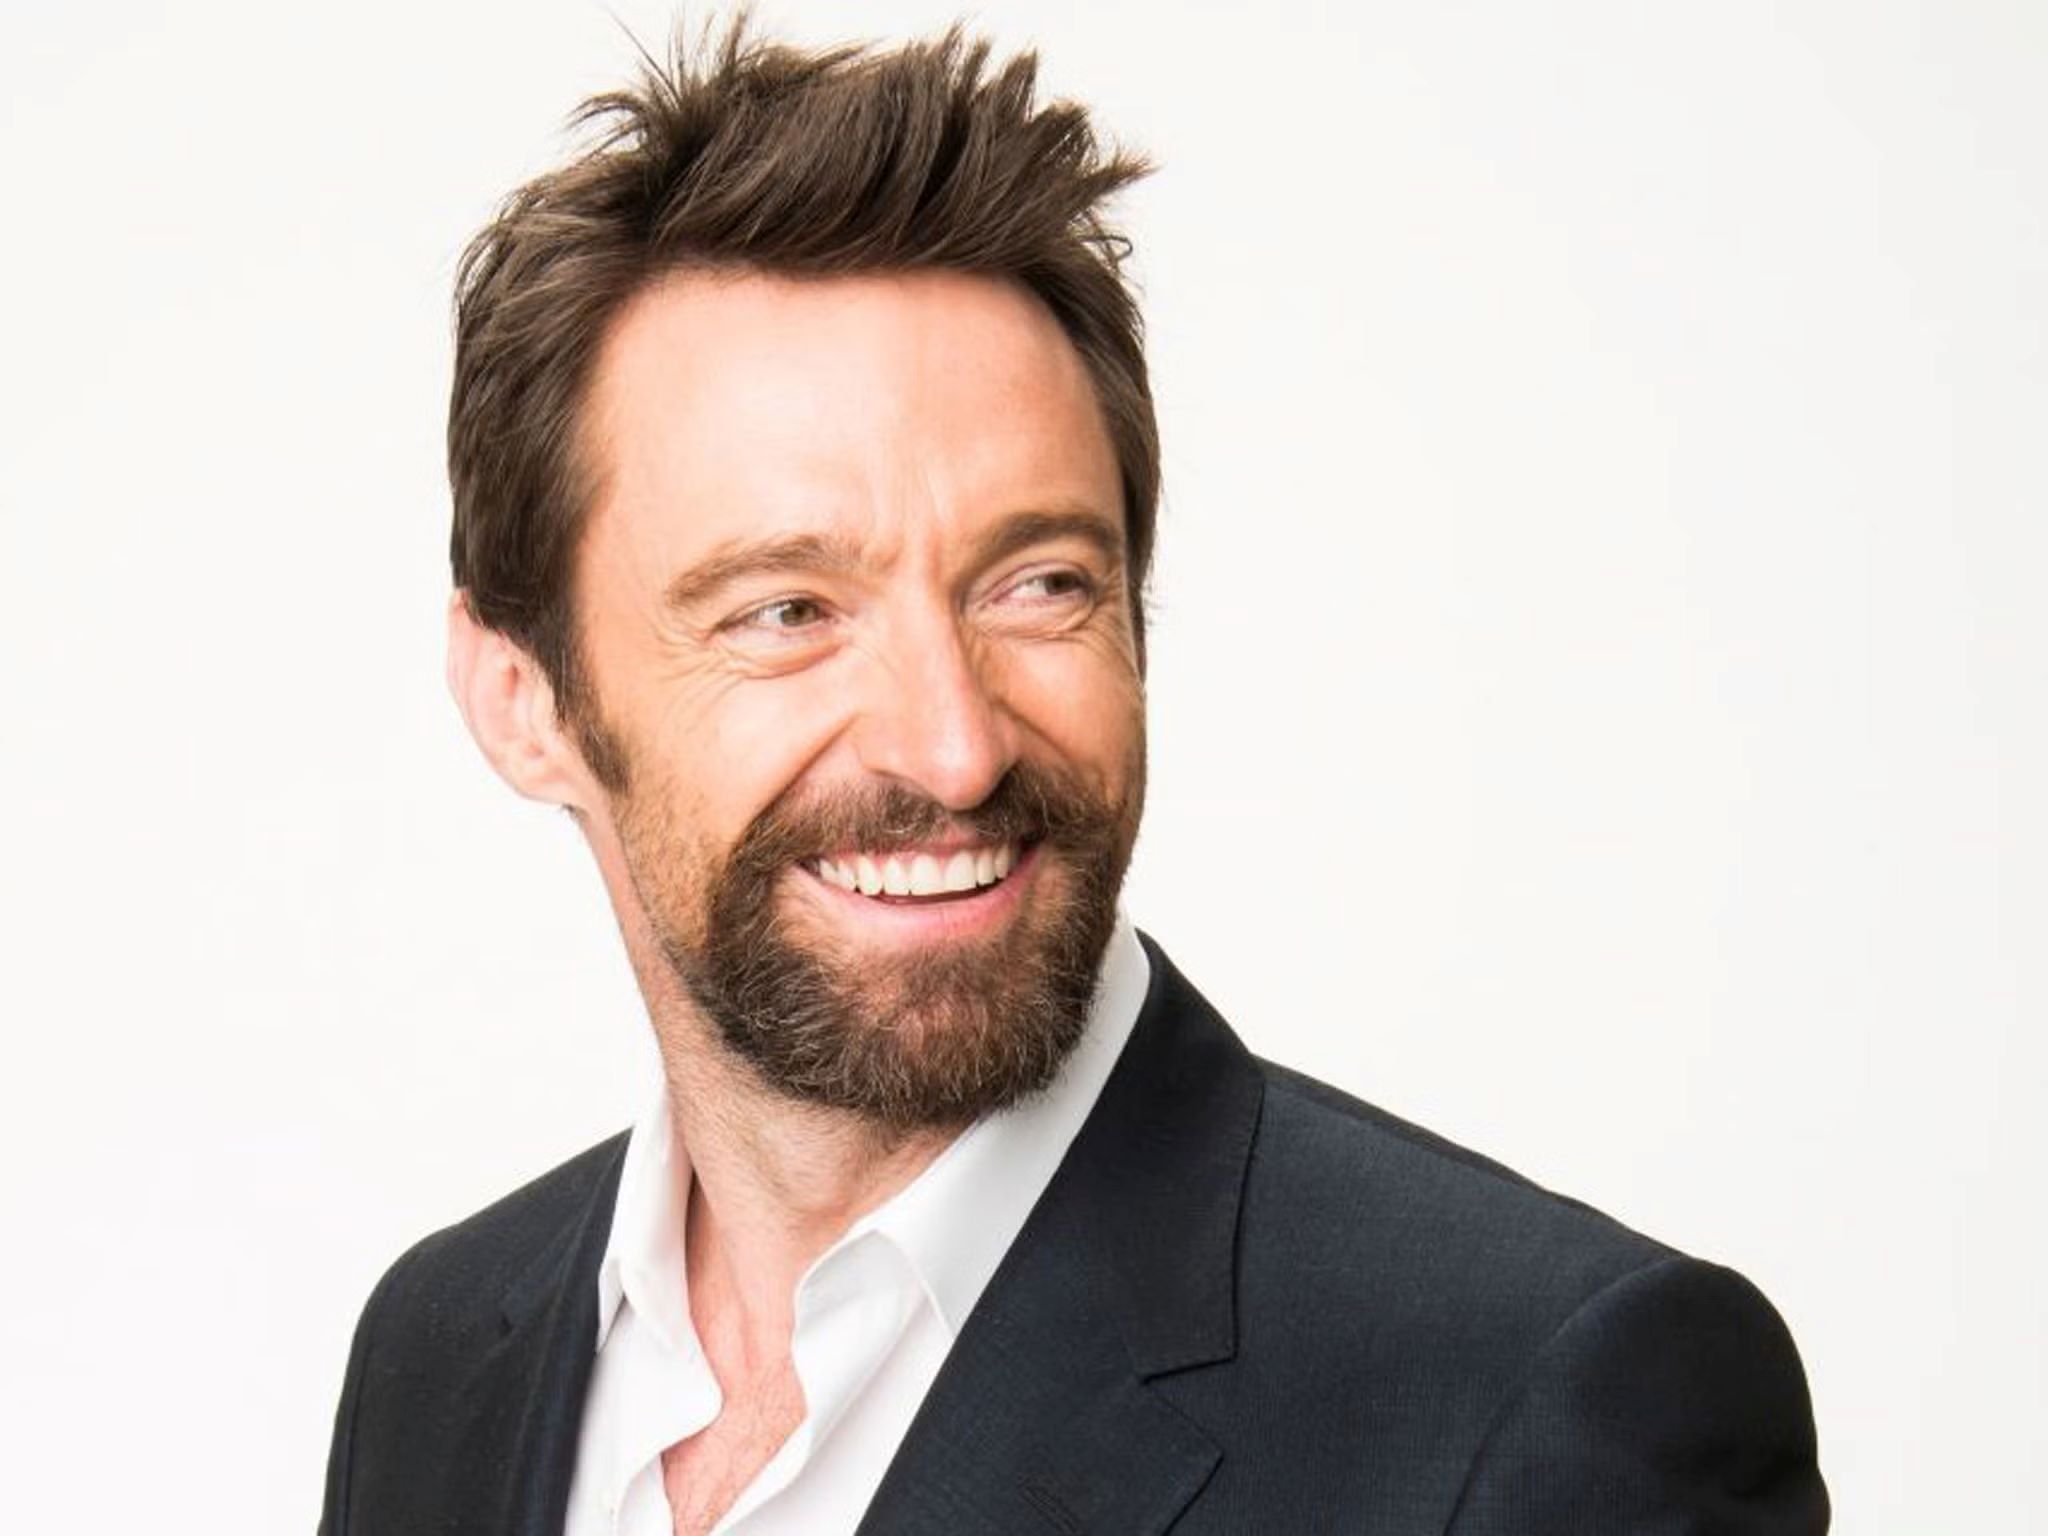 Hugh Jackman Opens Up About Difficult Split With Wife